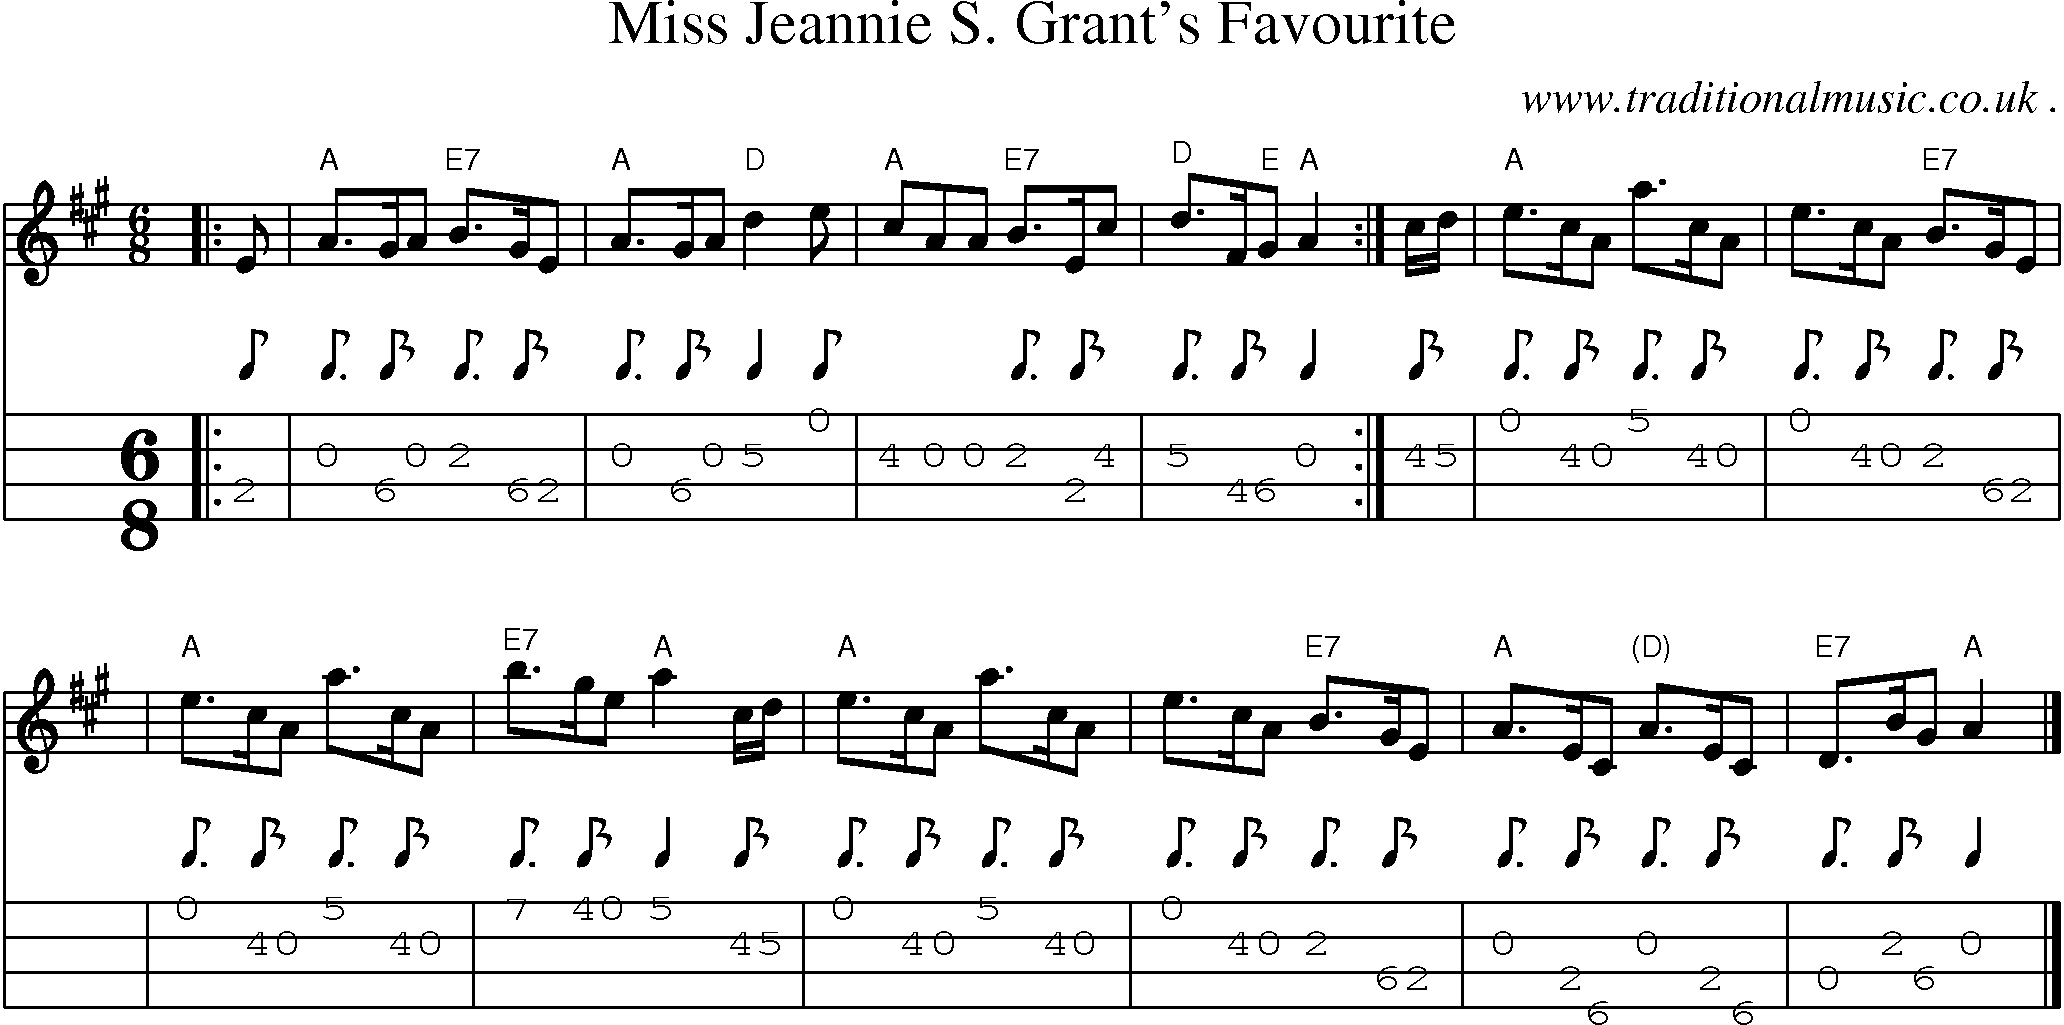 Sheet-music  score, Chords and Mandolin Tabs for Miss Jeannie S Grants Favourite